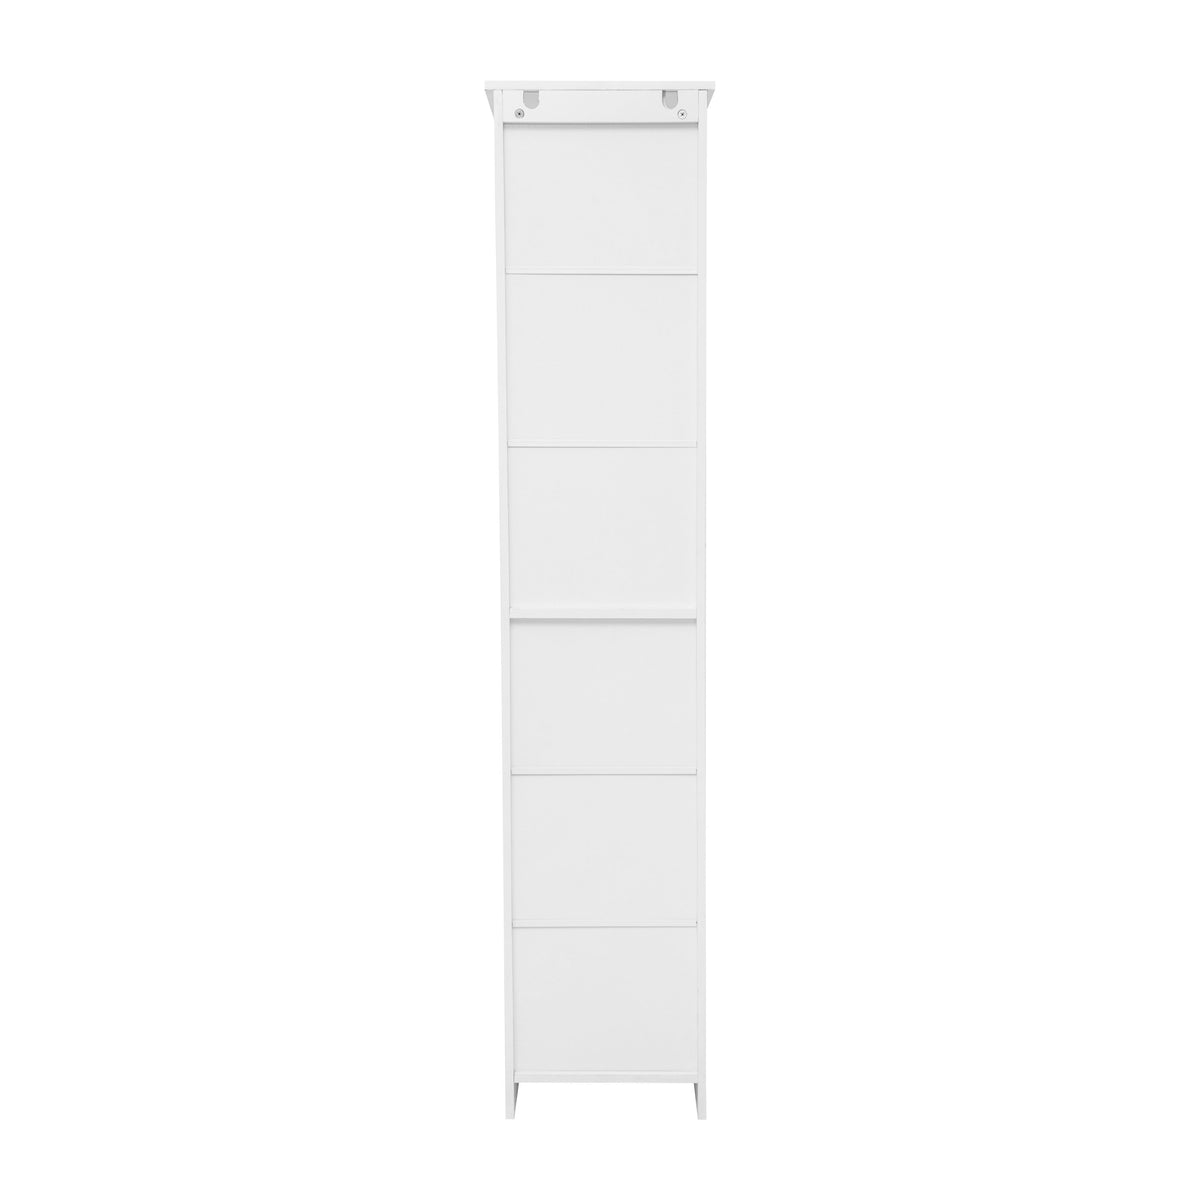 White |#| Modern Freestanding Linen Tower with Shelves and Magnetic Close Door - White